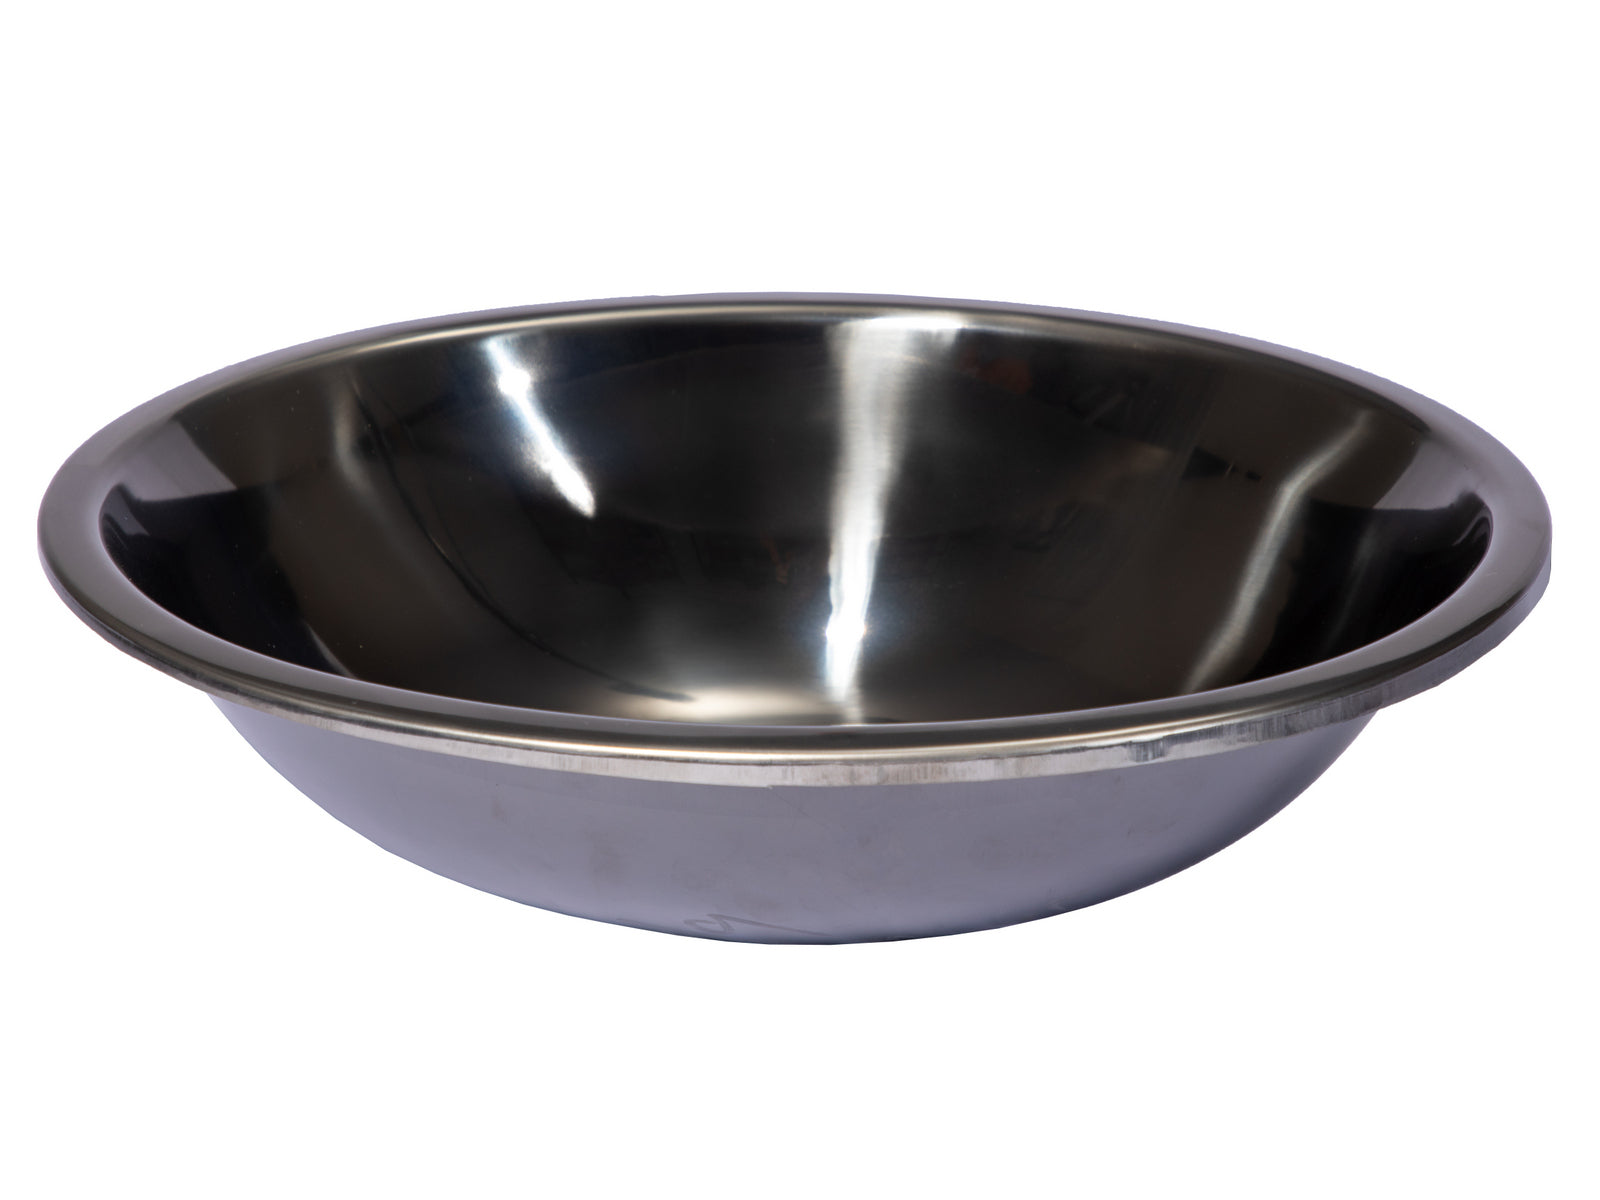 Oval 17 1/2" x 14" Top Mount Stainless Steel Bathroom Sink with Drain in Black